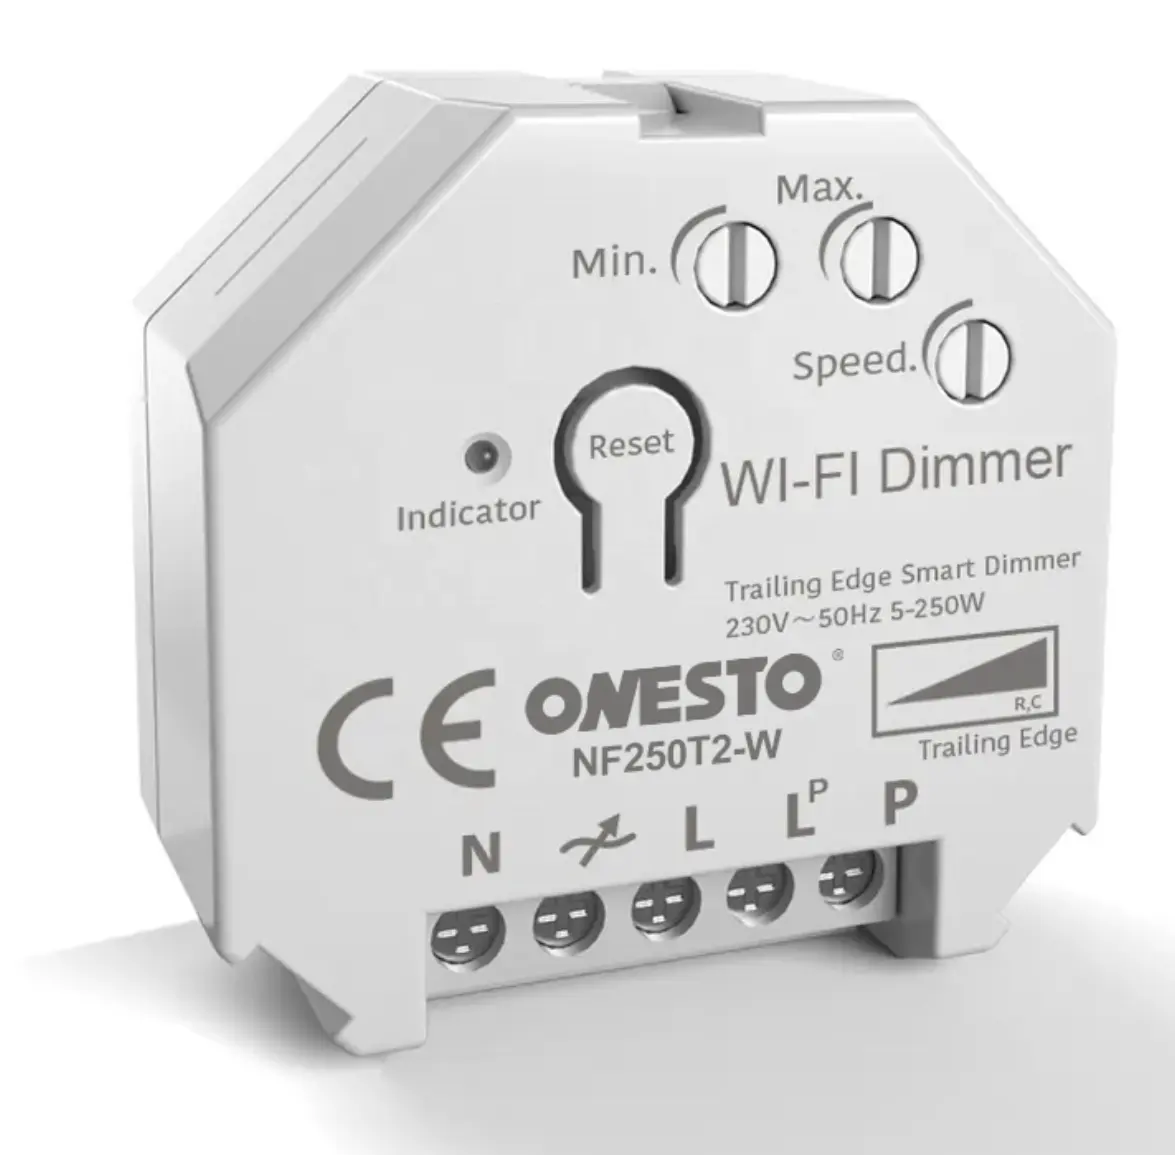 Wholesale high quality wifi dimmer controller 5W up to 250W Trailing Edge Smart Dimmer Modules